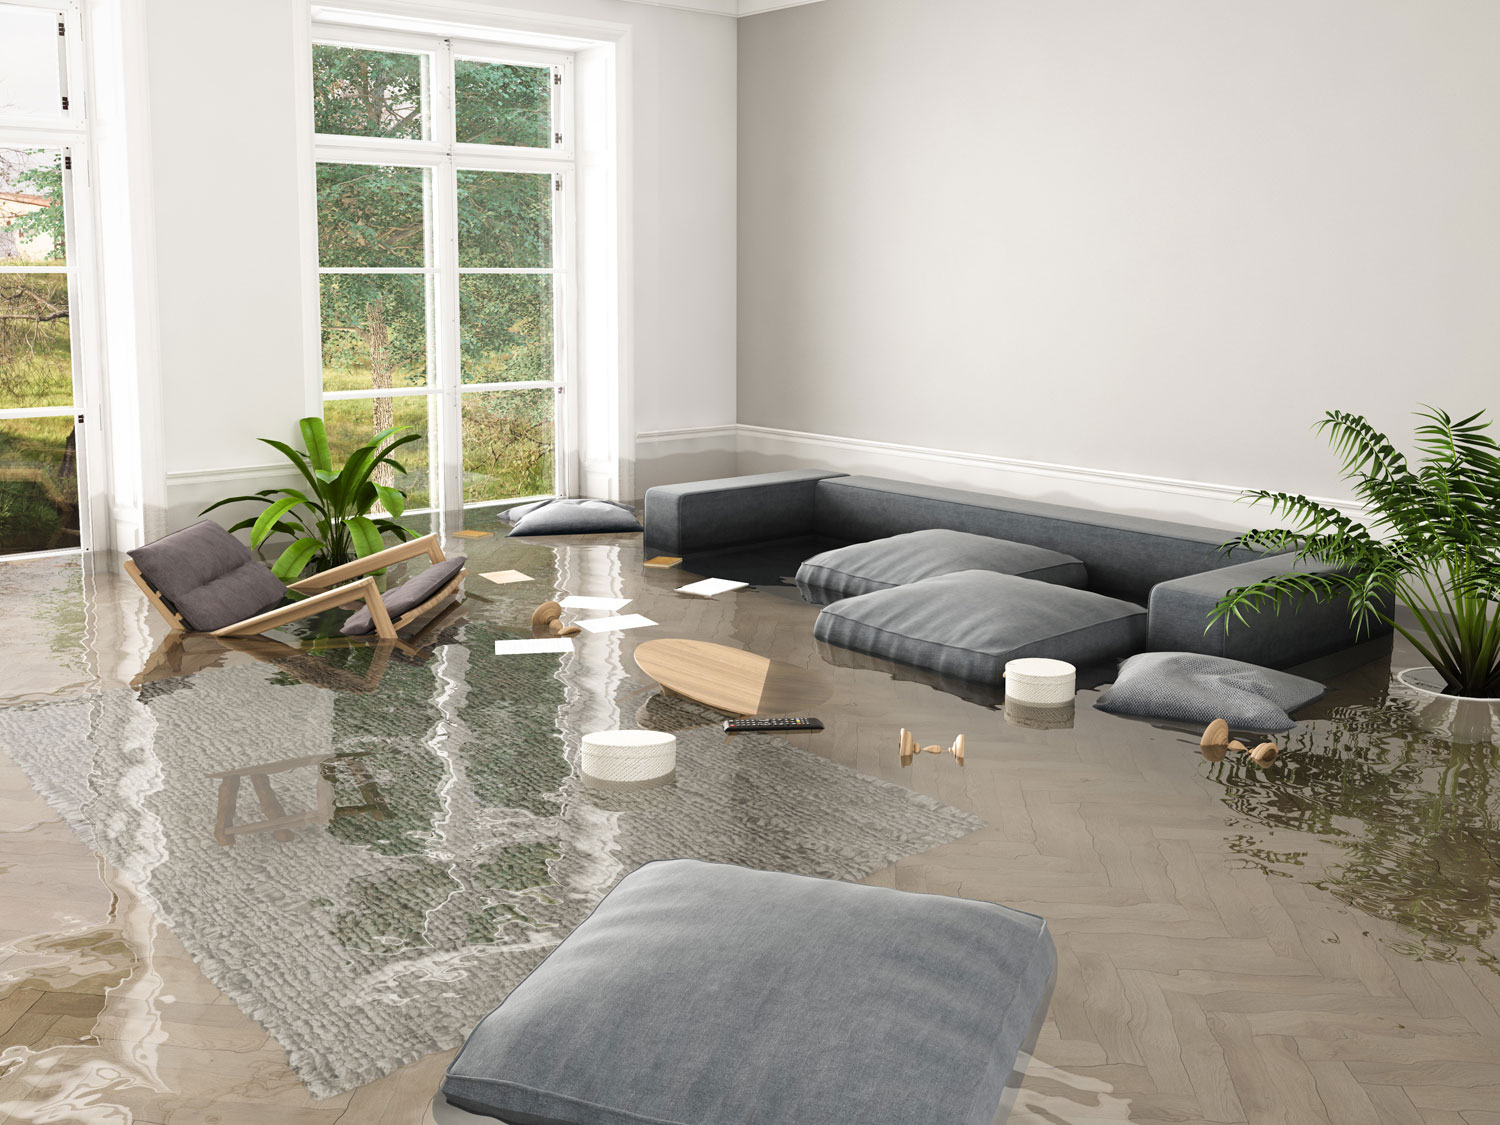 Water Damage Prevention and Detection